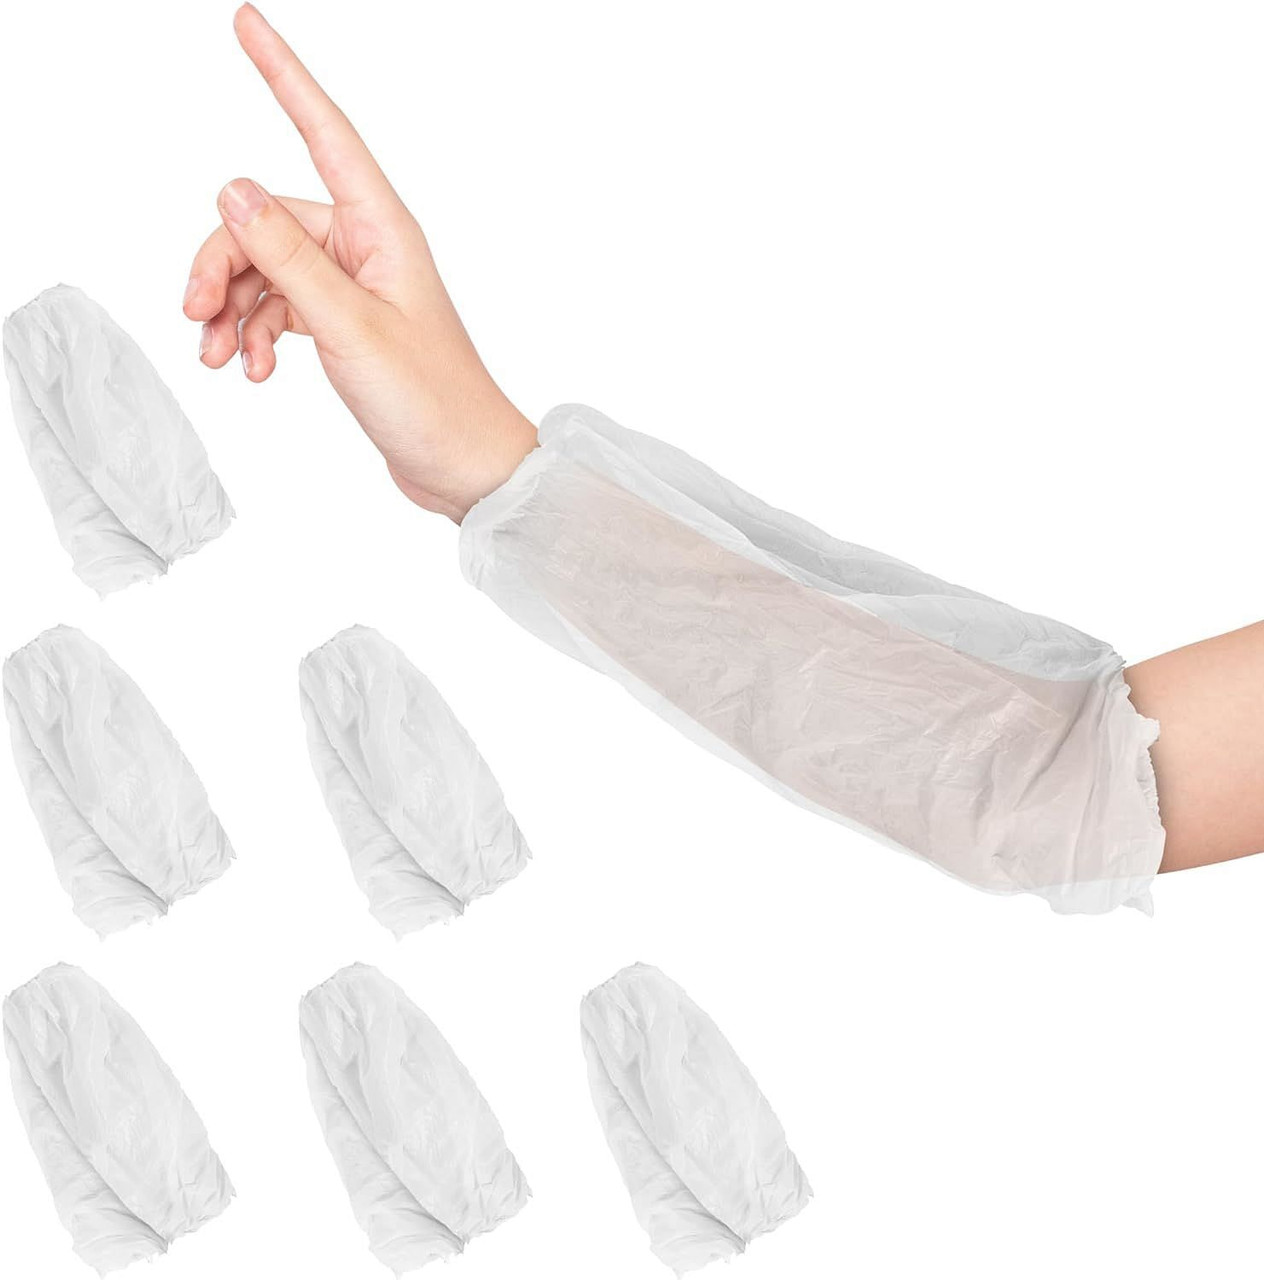 Disposable Sleeve Covers 18 Inch. Pack of 100 White Disposable Sleeves with Elastic Ends. 1.5 Mil P